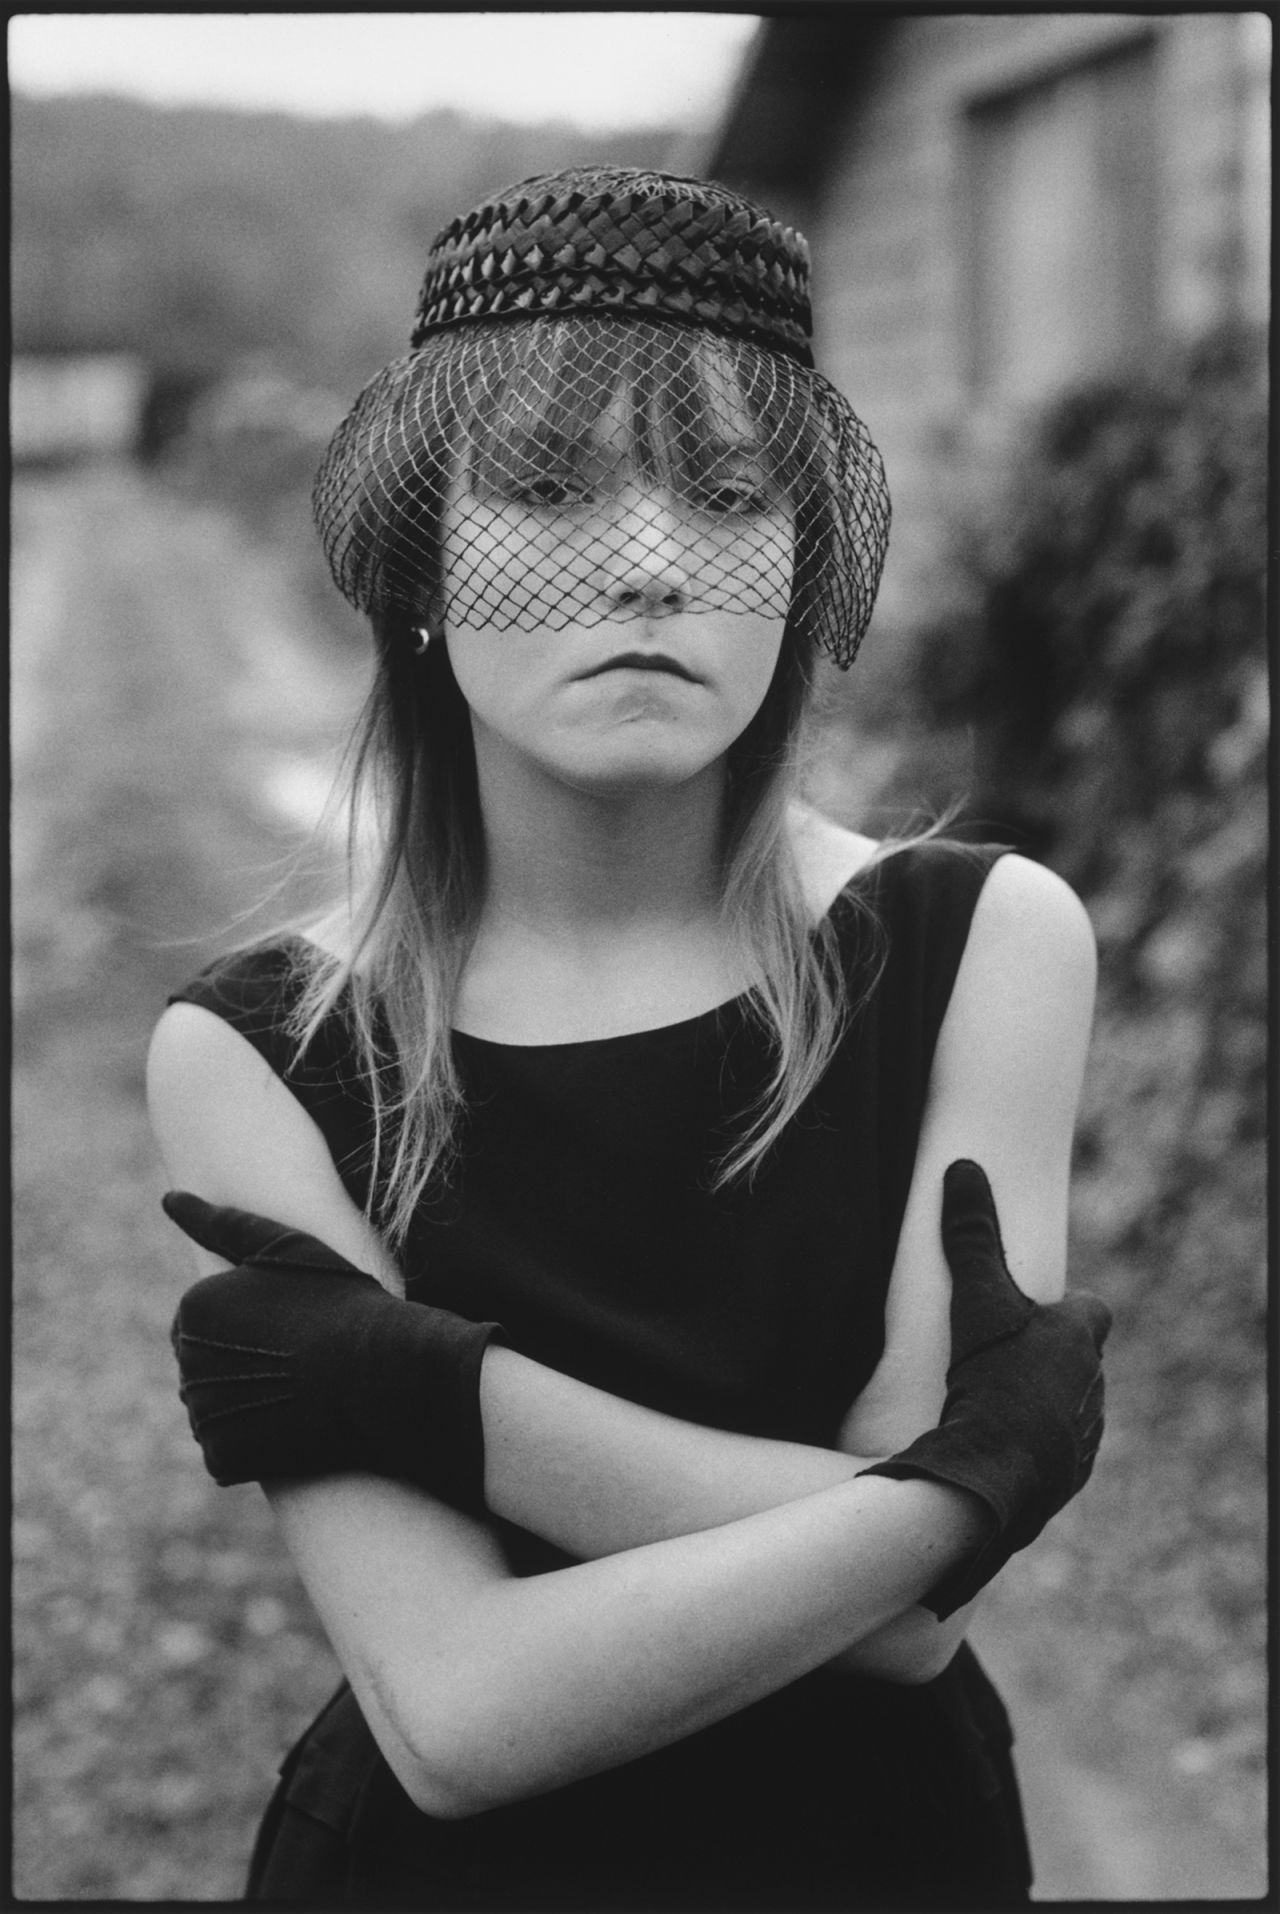 <a href="http://www.cnn.com/2015/09/20/us/cnnphotos-tiny-streetwise-mary-ellen-mark/index.html" target="_blank">The late Mary Ellen Mark sought the "unfamous" </a>and photographed them with empathy and technical mastery. But none like Erin "Tiny" Blackwell, the 13-year-old prostitute she found among Seattle's vagrant youth in 1983.